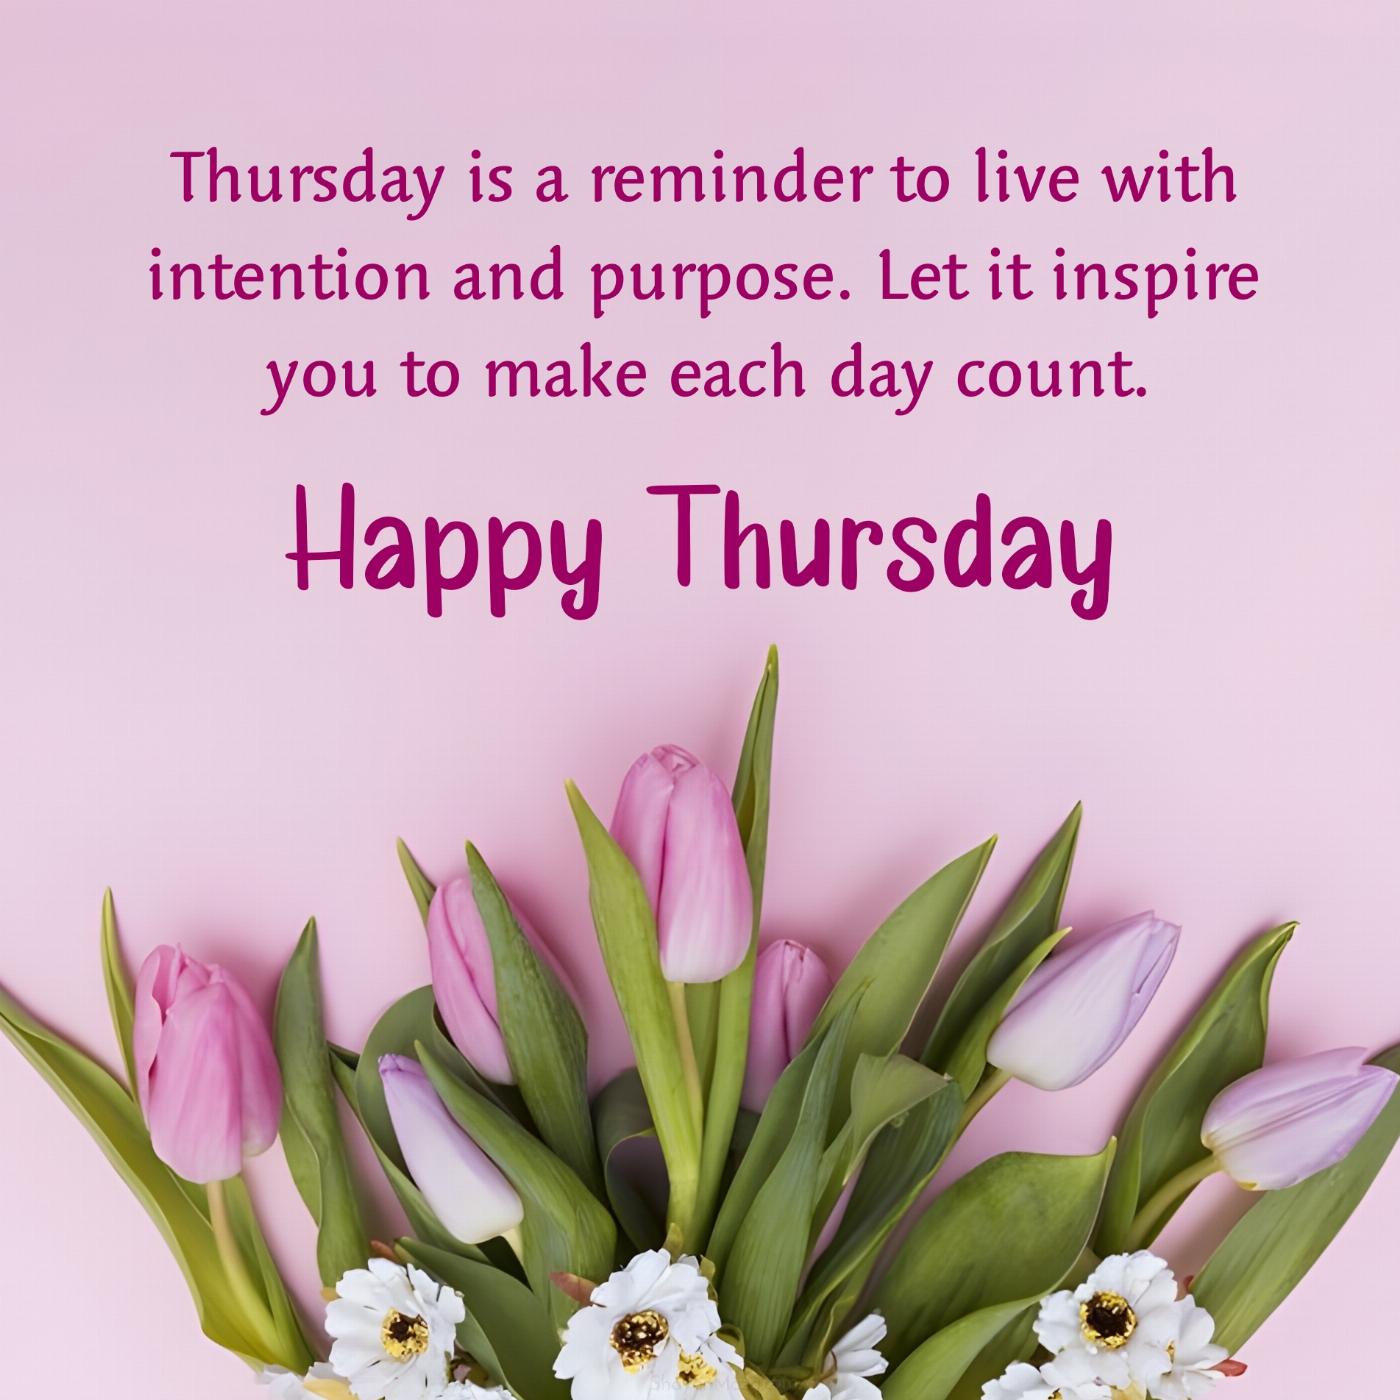 Thursday is a reminder to live with intention and purpose